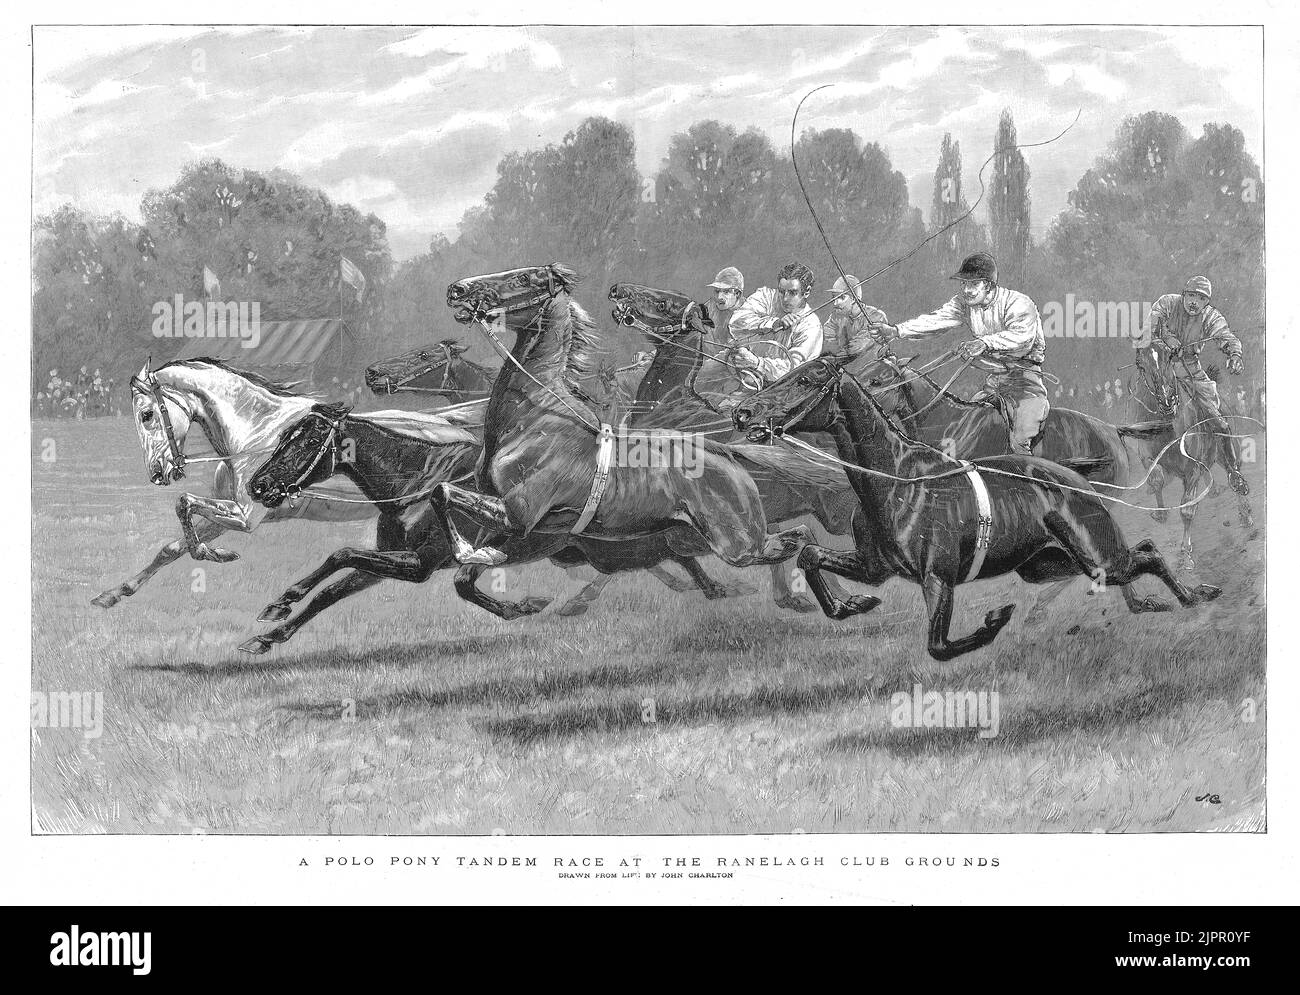 Engraving of a polo pony tandem race at the Ranelach Club Grounds, drawn by John Charlton, 1896 Stock Photo